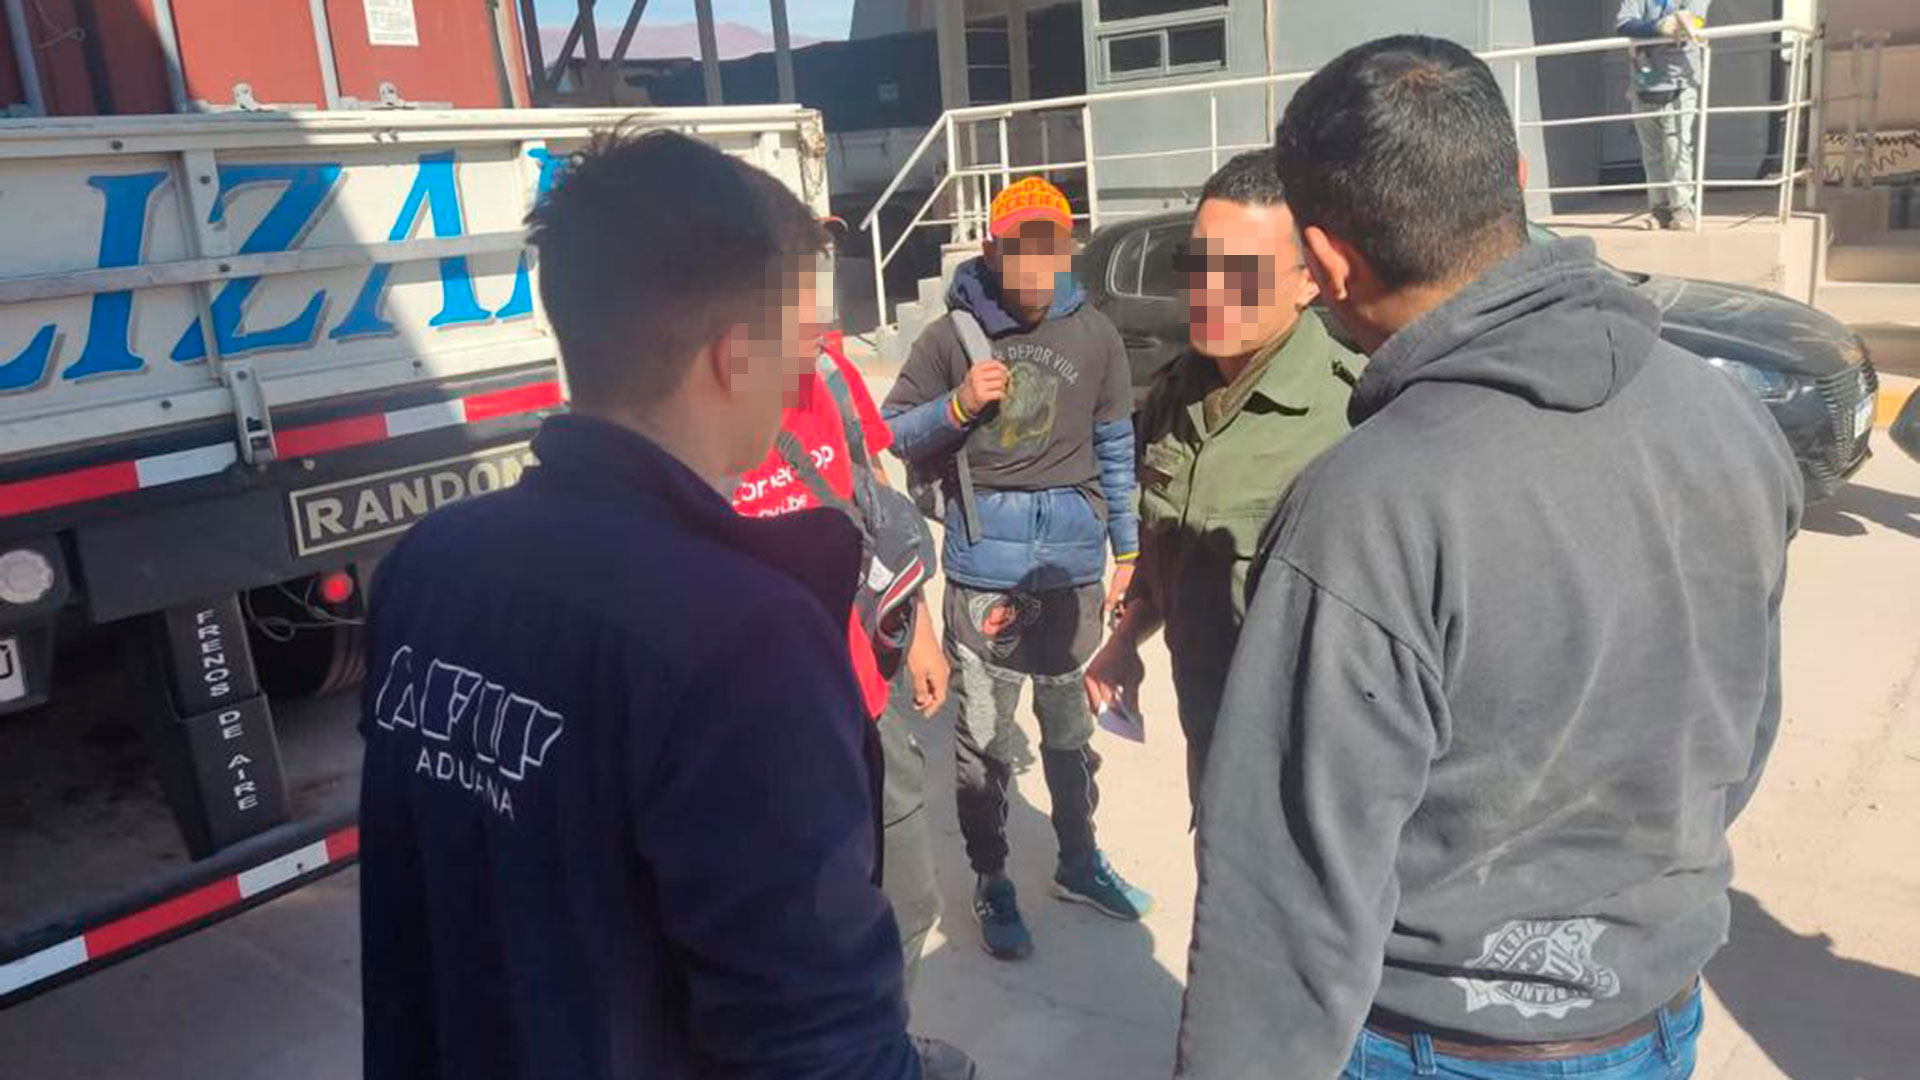 Gendarmerie and Customs together with the two Colombian citizens who tried to enter the country illegally